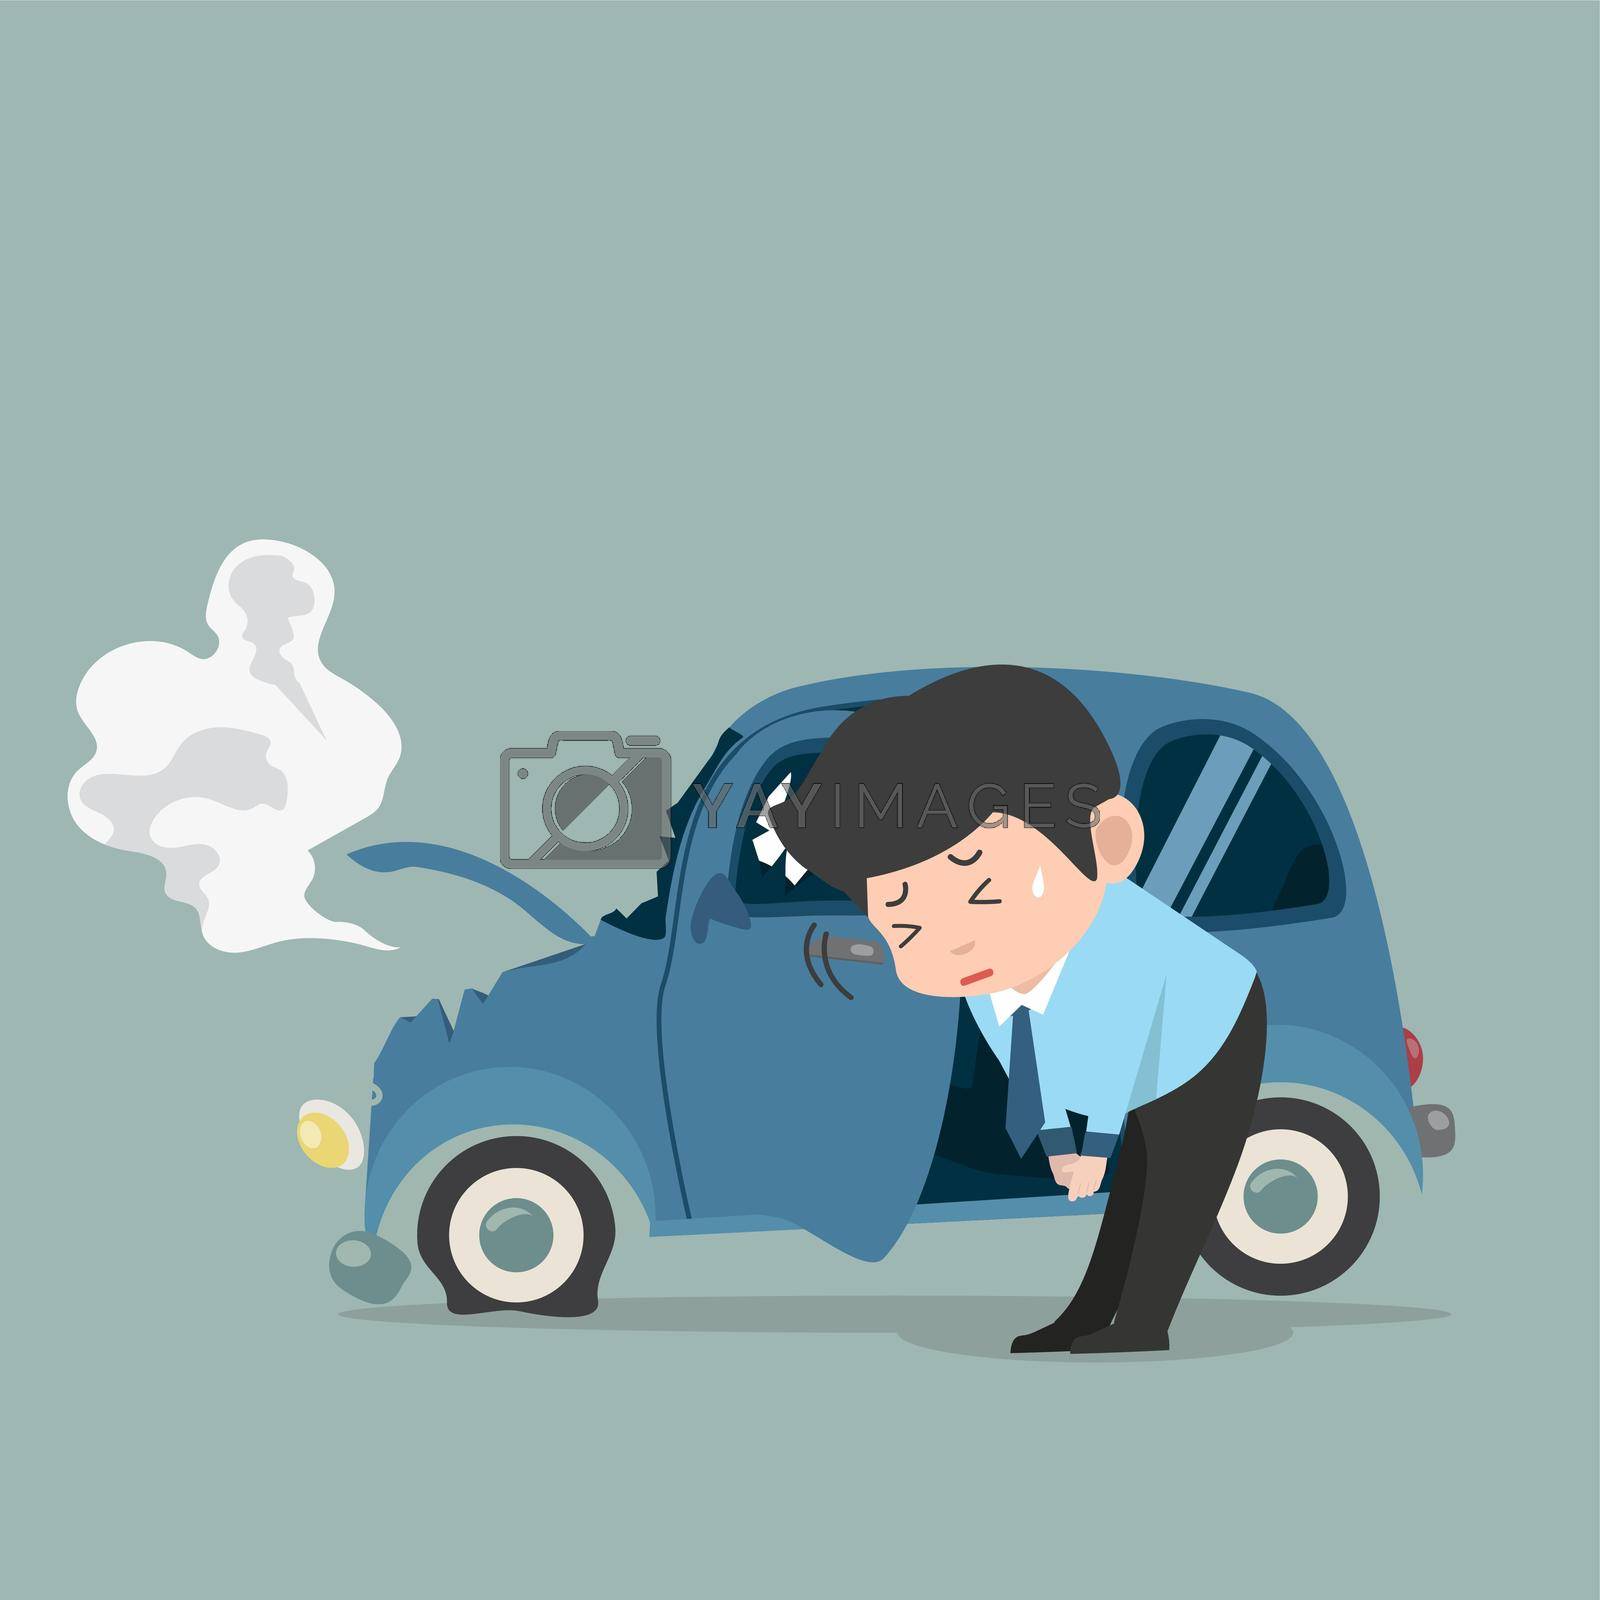 Royalty free image of Businessman sorry with Car accident  by focus_bell